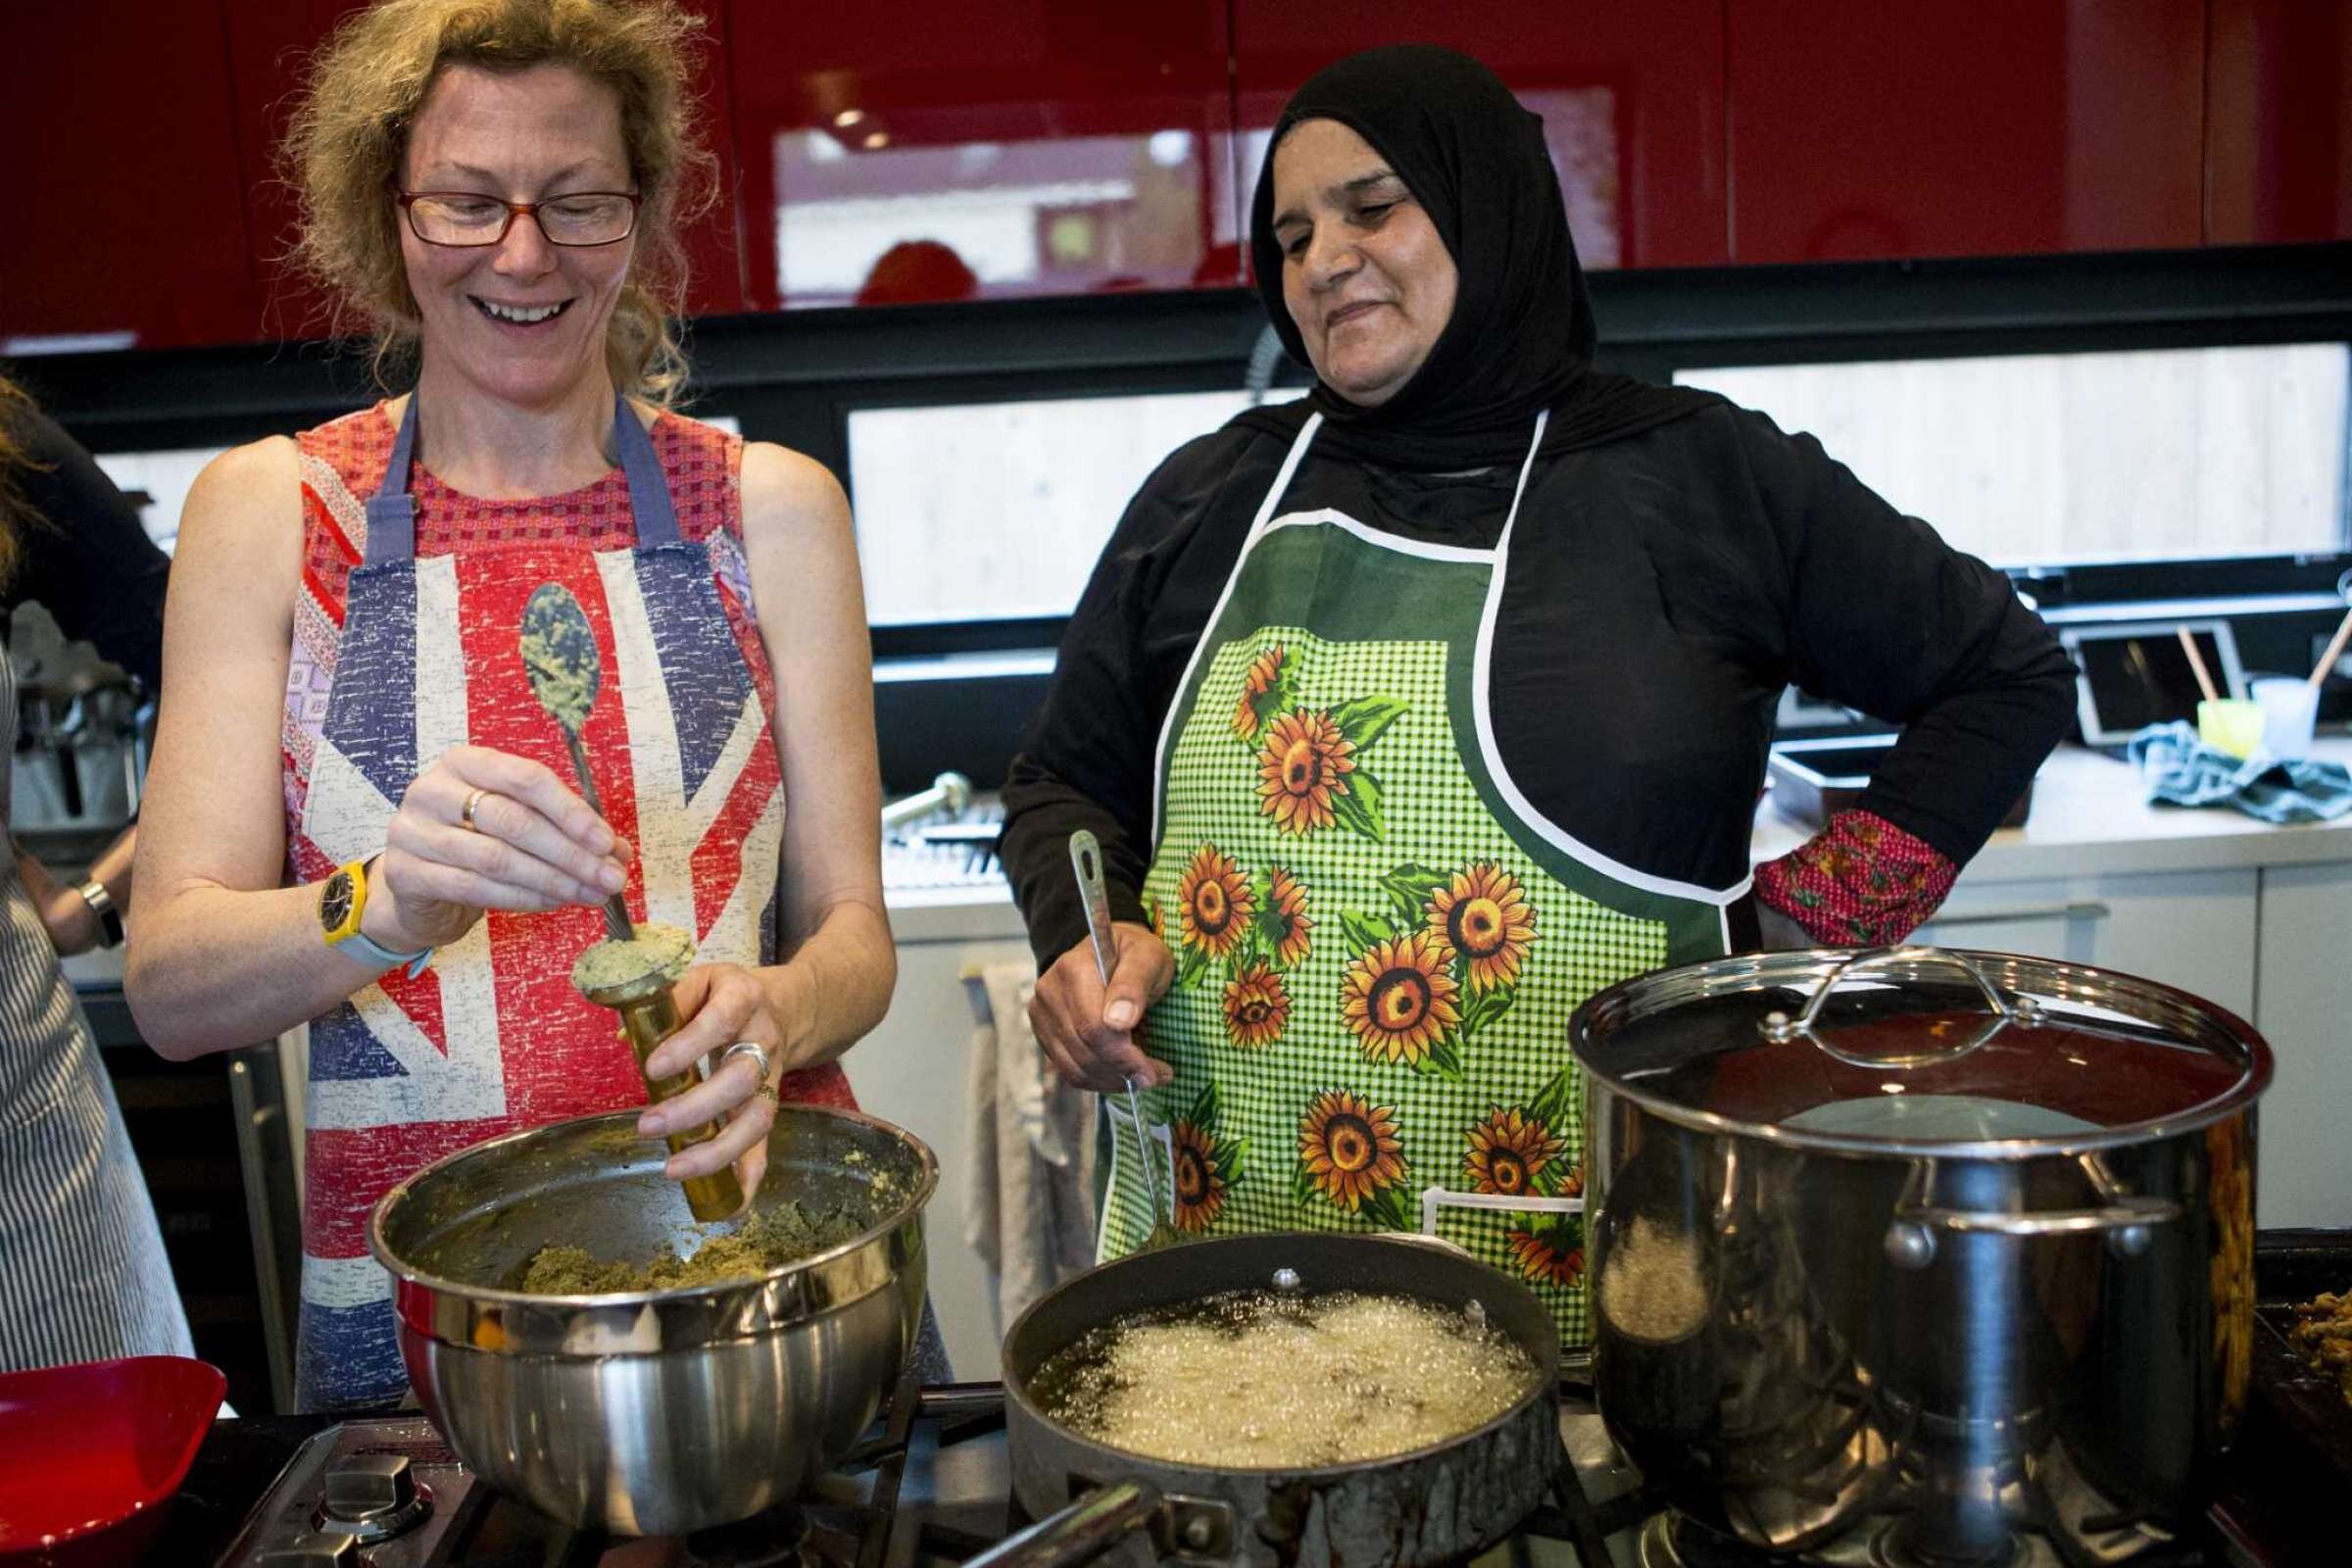 Syrian refugee shares kitchen talent with a dash of love for home